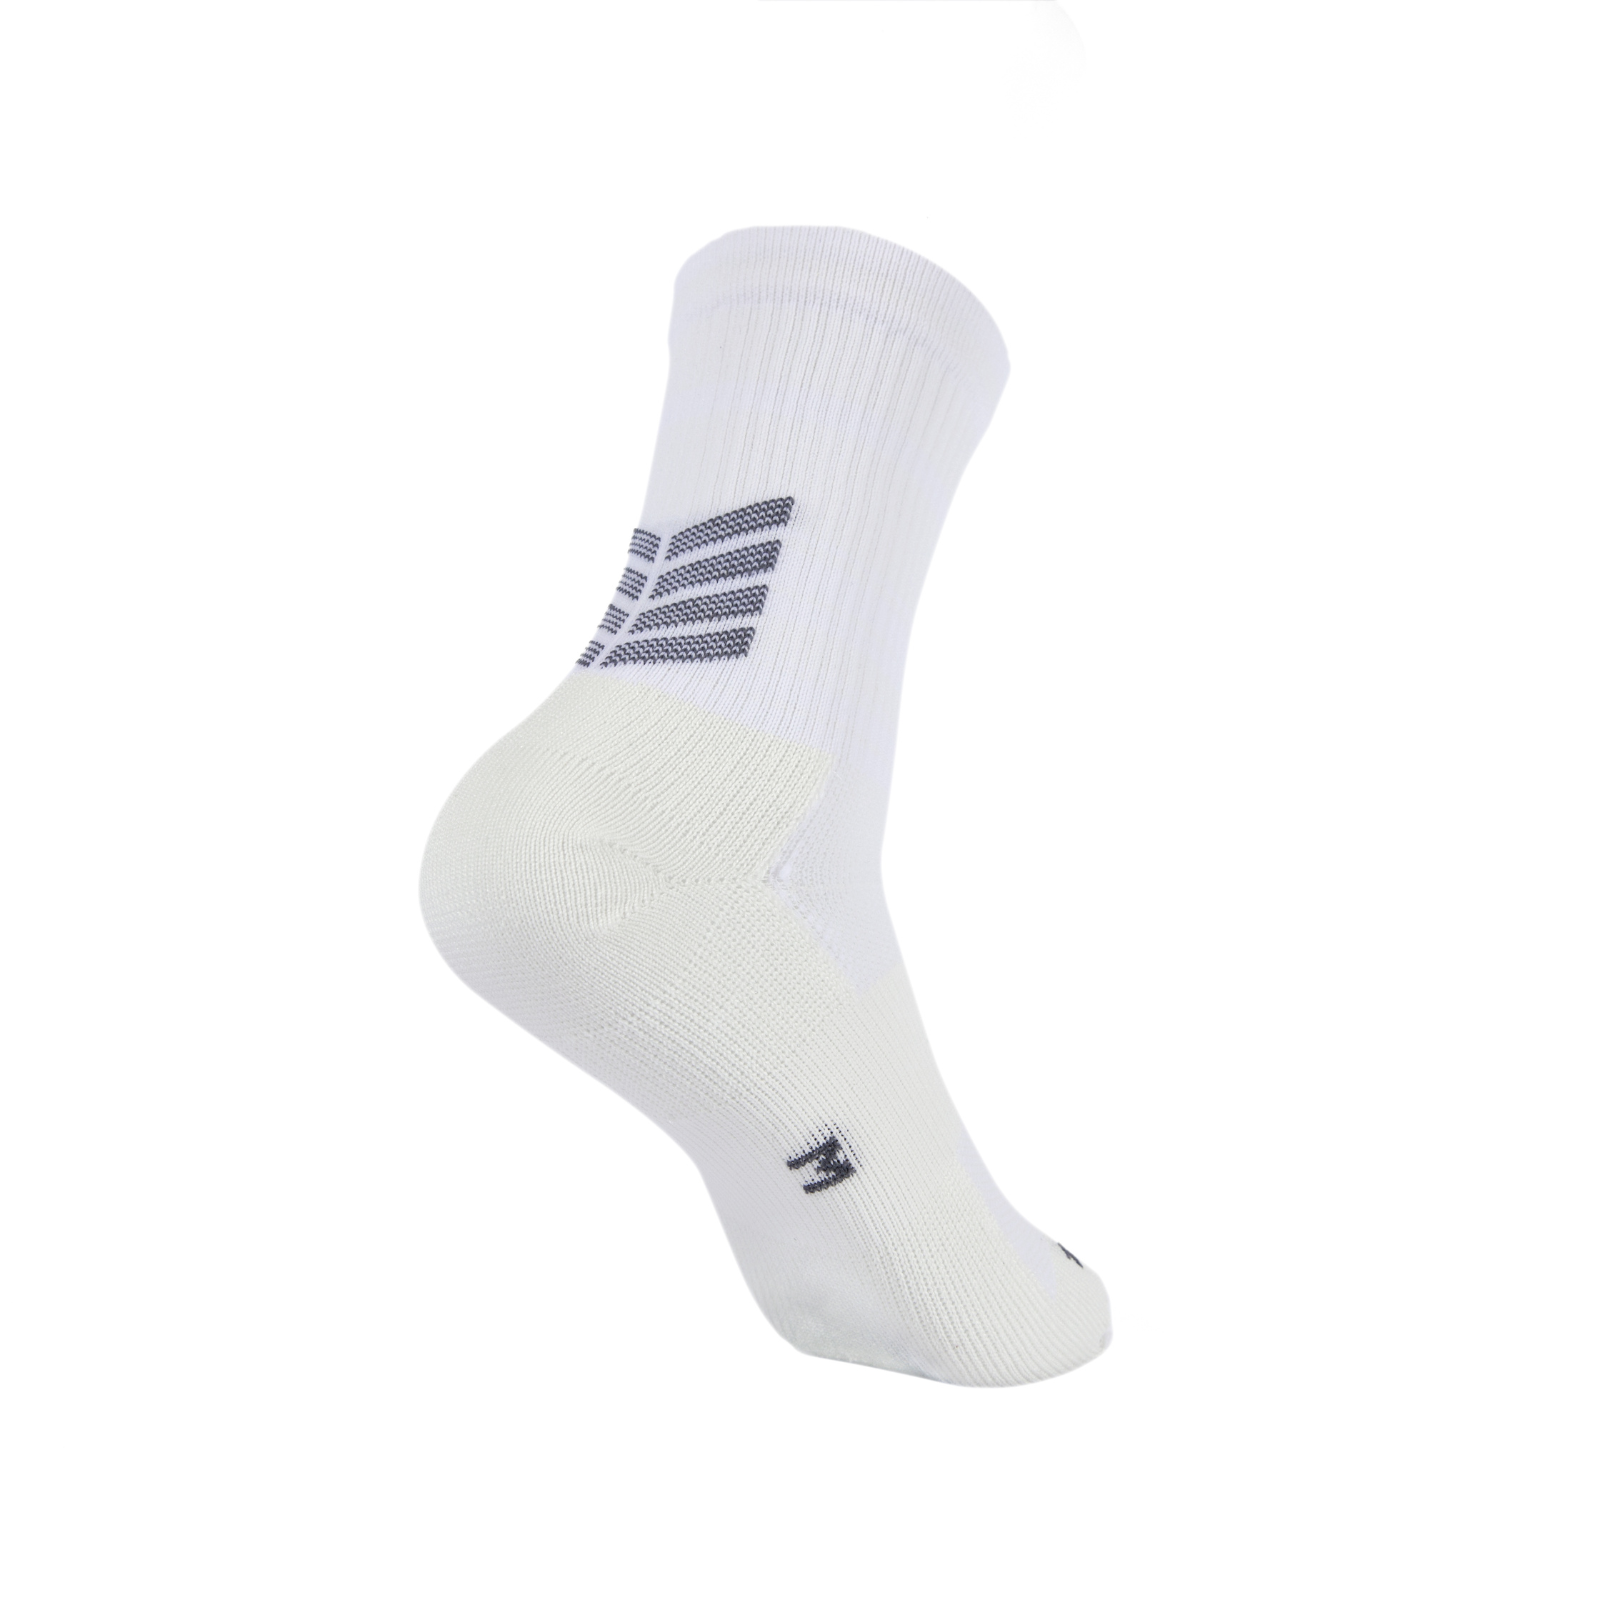 Maroon and White Grip Socks – GRIPTEC